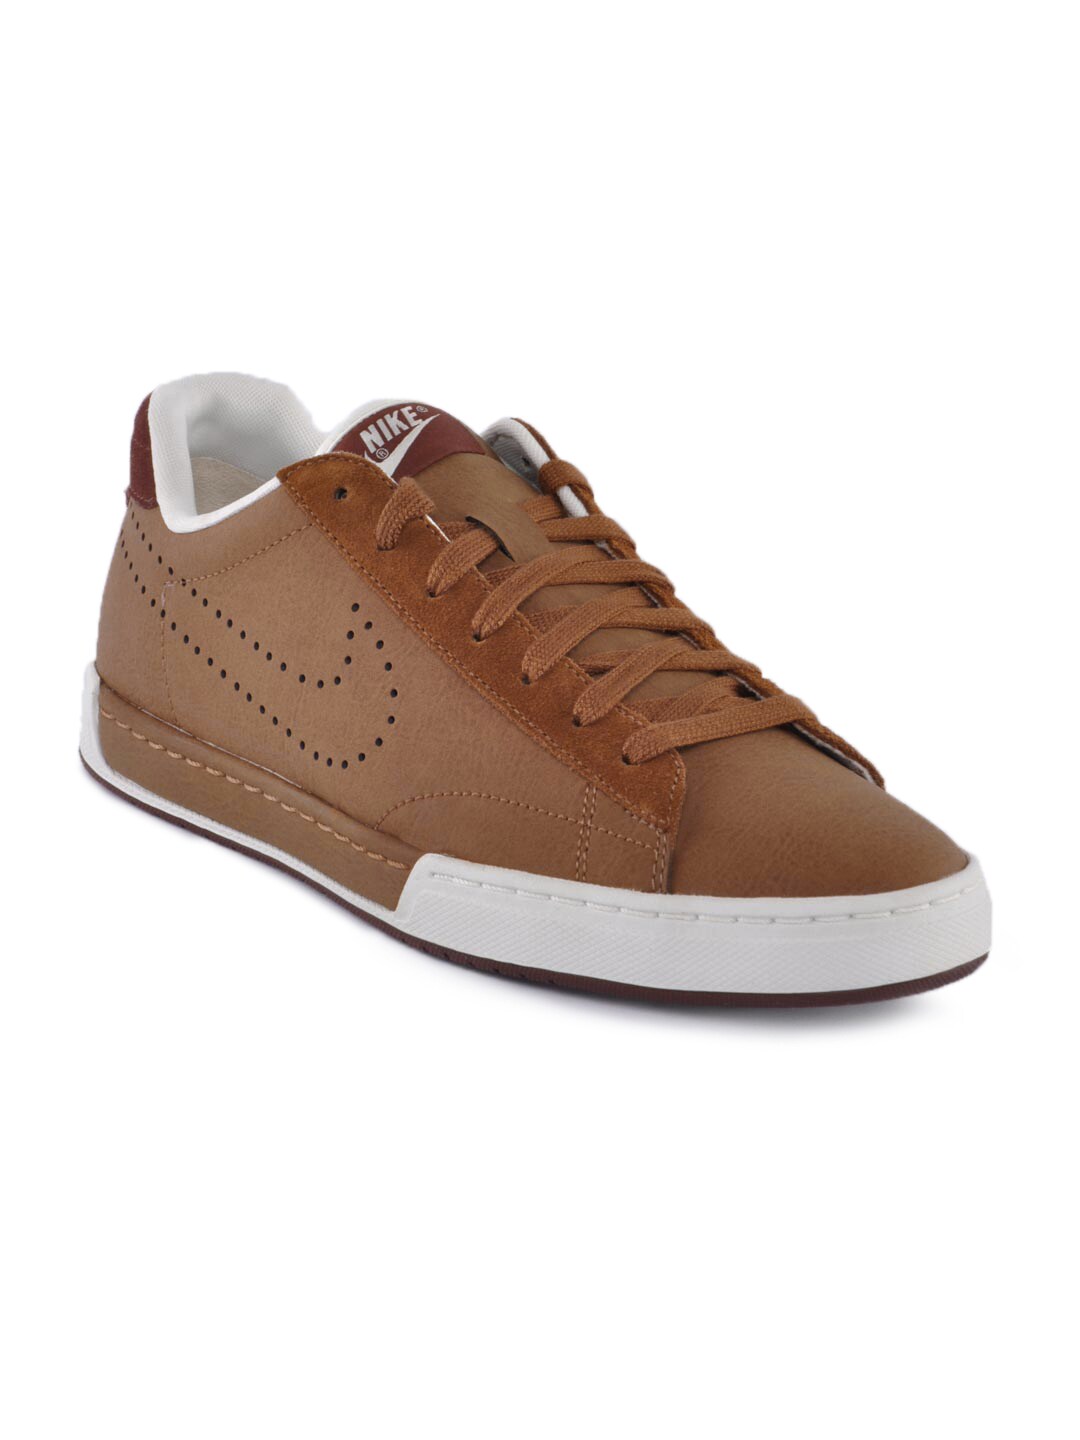 Nike Men Air Rally Brown Casual Shoes